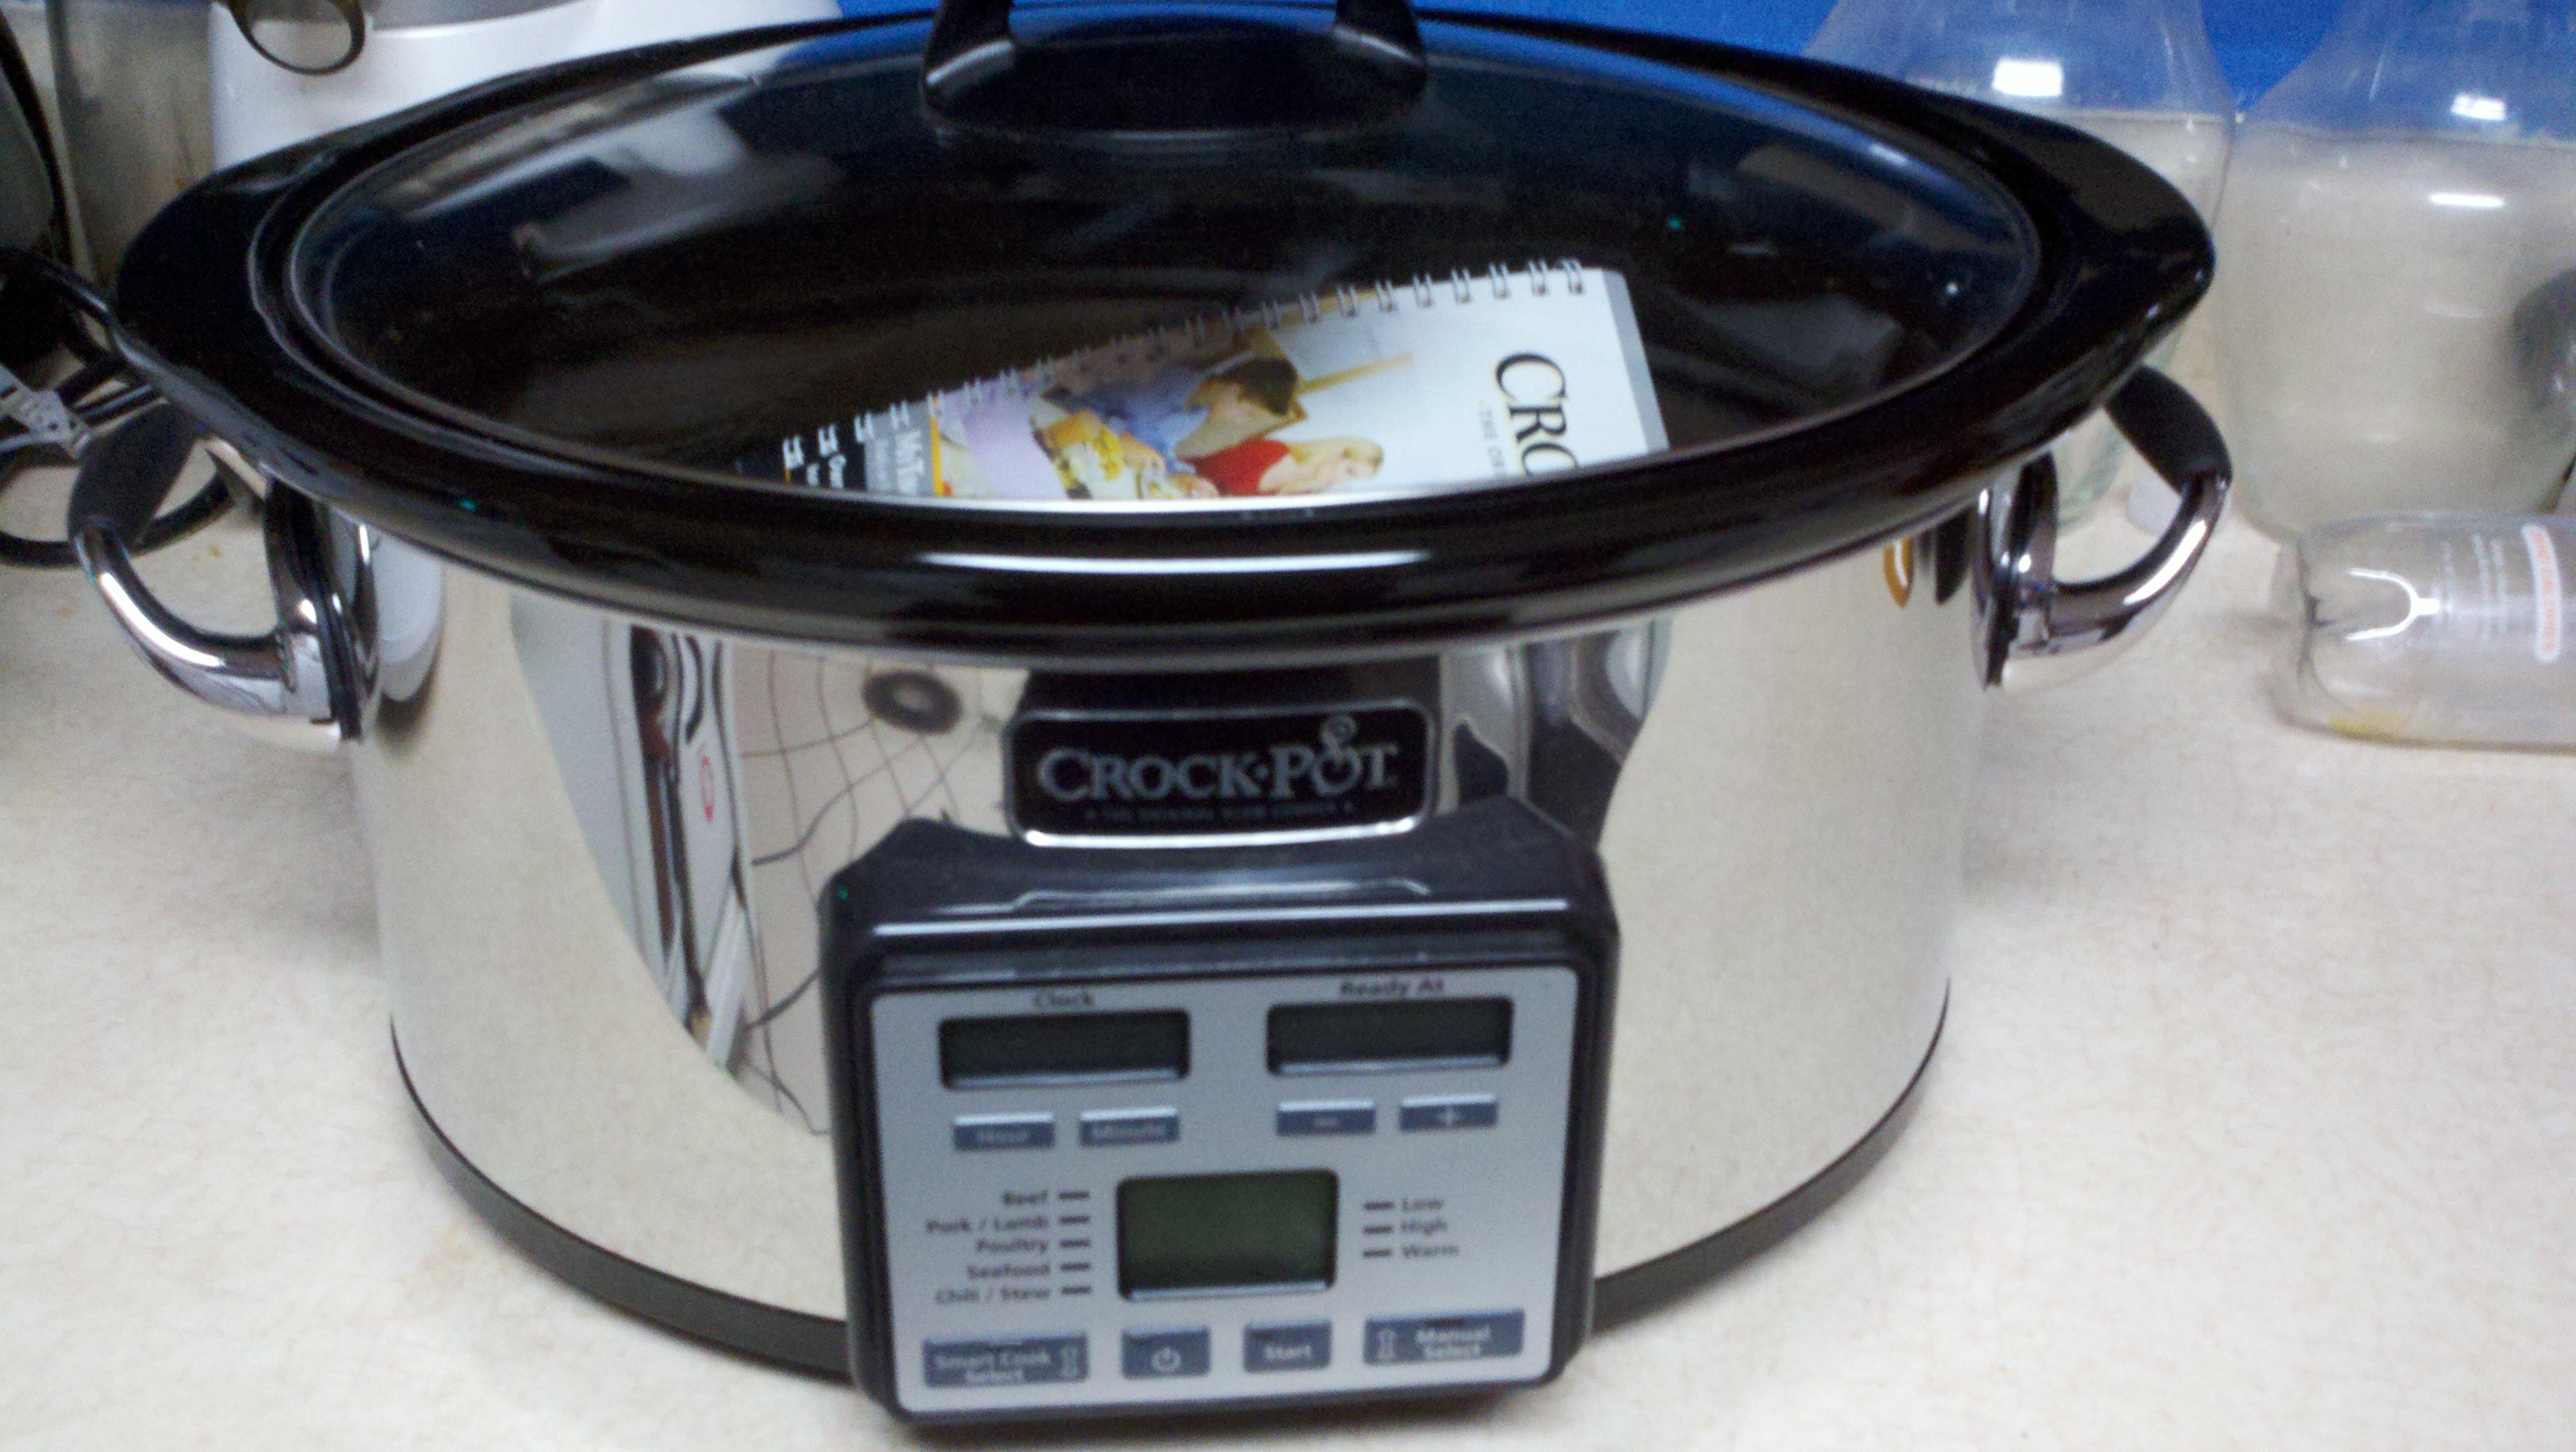 Multi-compartment slow cooker - The crock-pot perfect for time